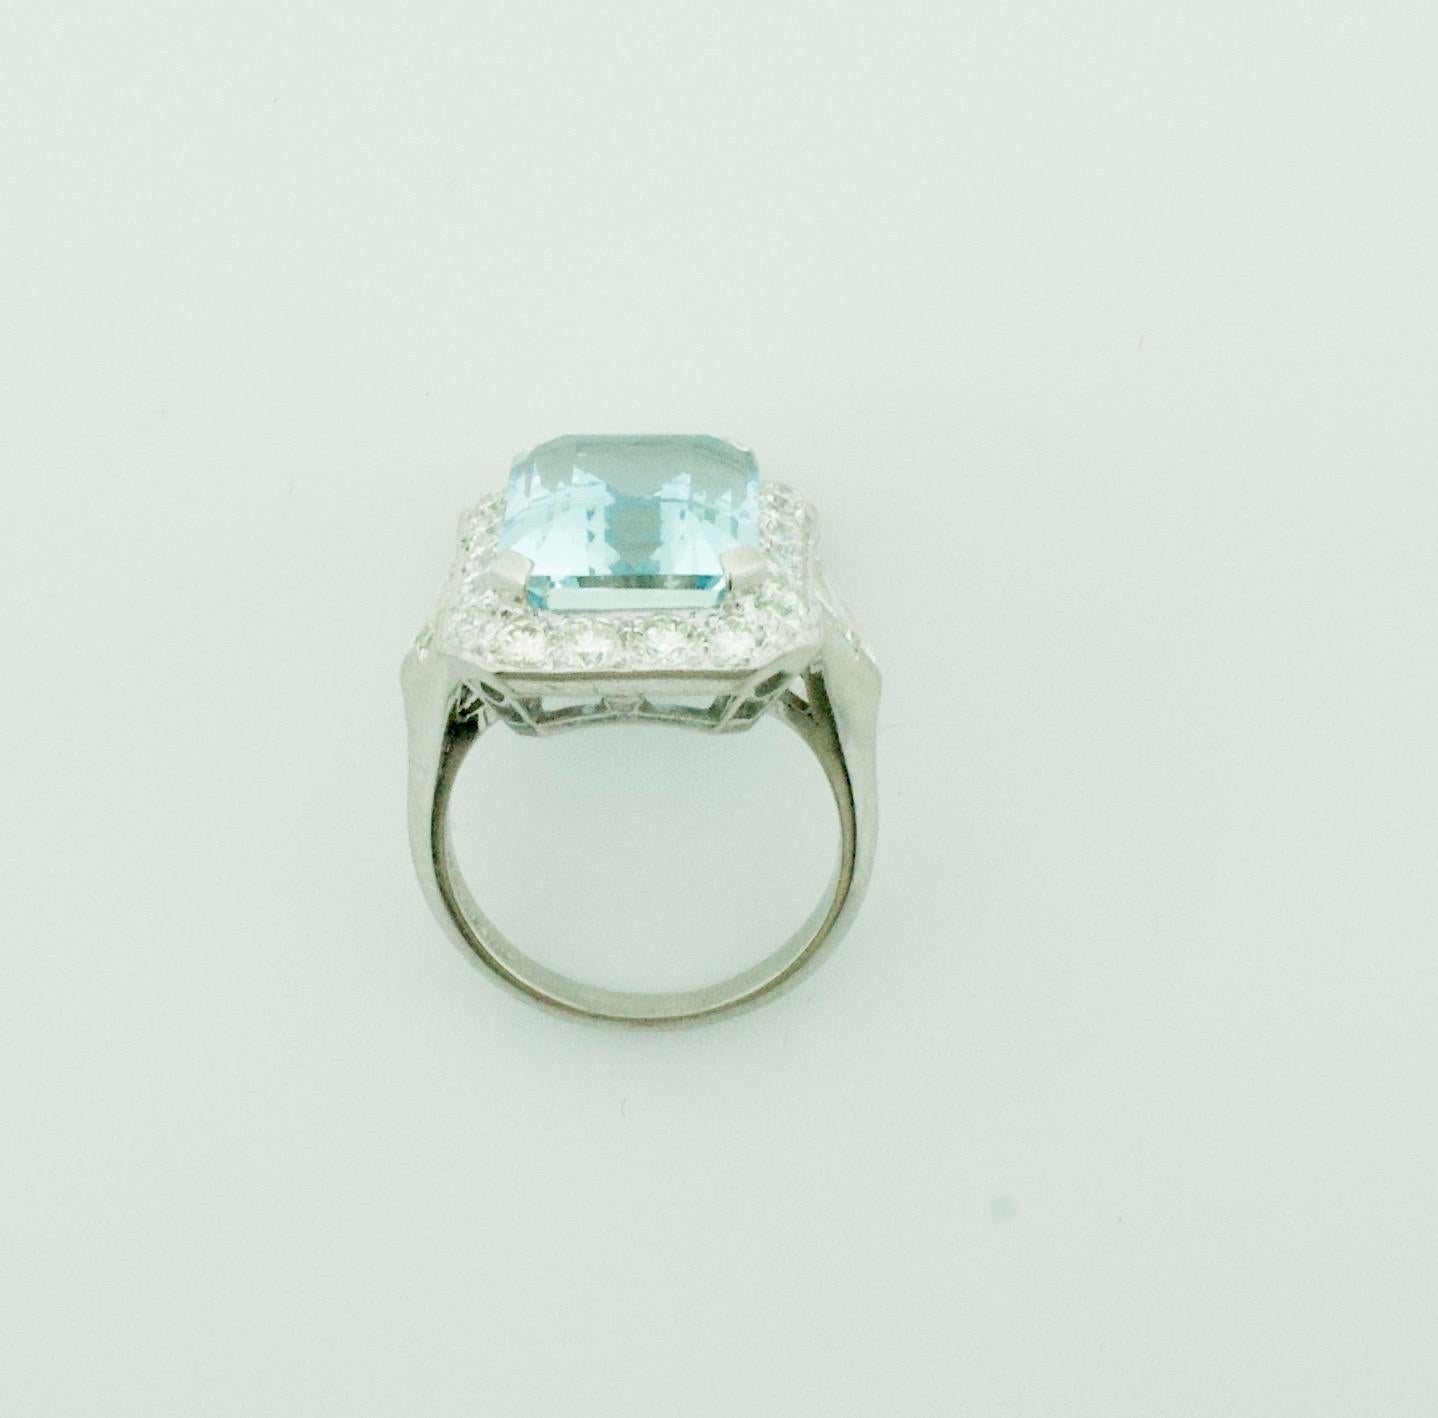 Platinum 10 Carat Aquamarine and Diamond Cocktail Ring
Introducing the exquisite Lady's Platinum Aquamarine/Diamond circa 1970's Ring, a timeless piece of jewelry that radiates elegance and sophistication. This stunning ring features a mesmerizing